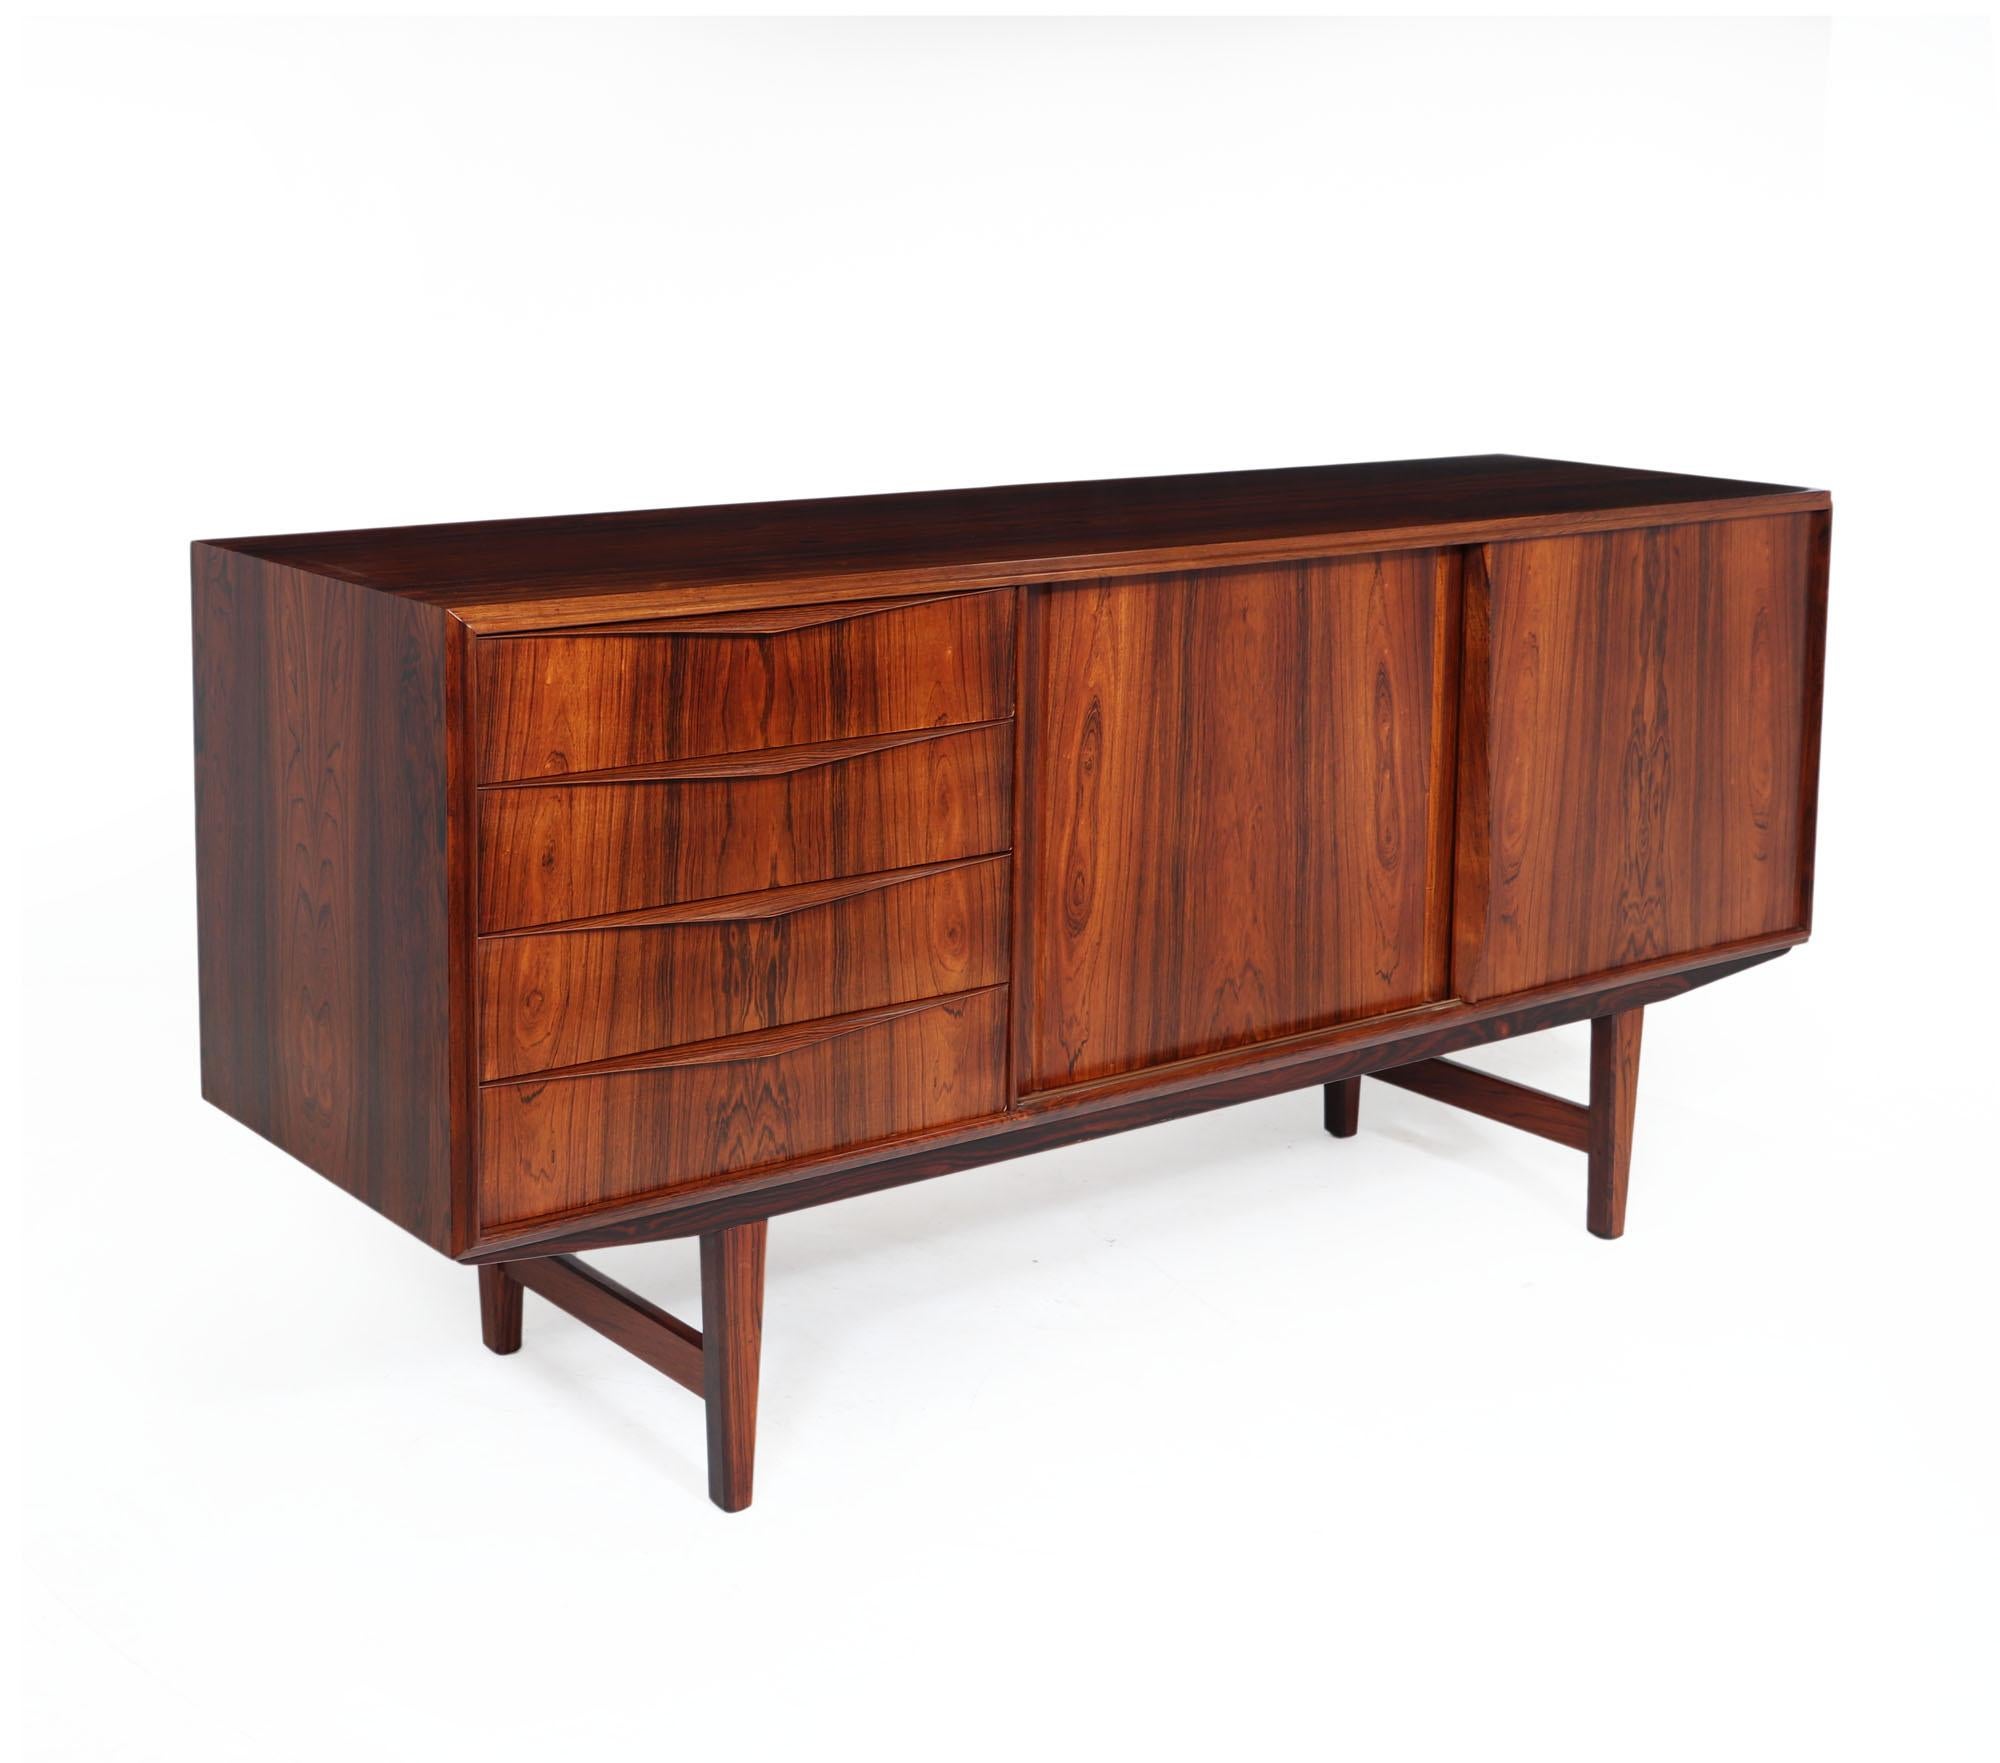 Midcentury sideboard
A midcentury sideboard produced in the 1960s in Denmark, it has four drawers to the left with sculpted handles and two sliding doors on the right with adjustable height shelf behind, it stands on an under frame and raised by